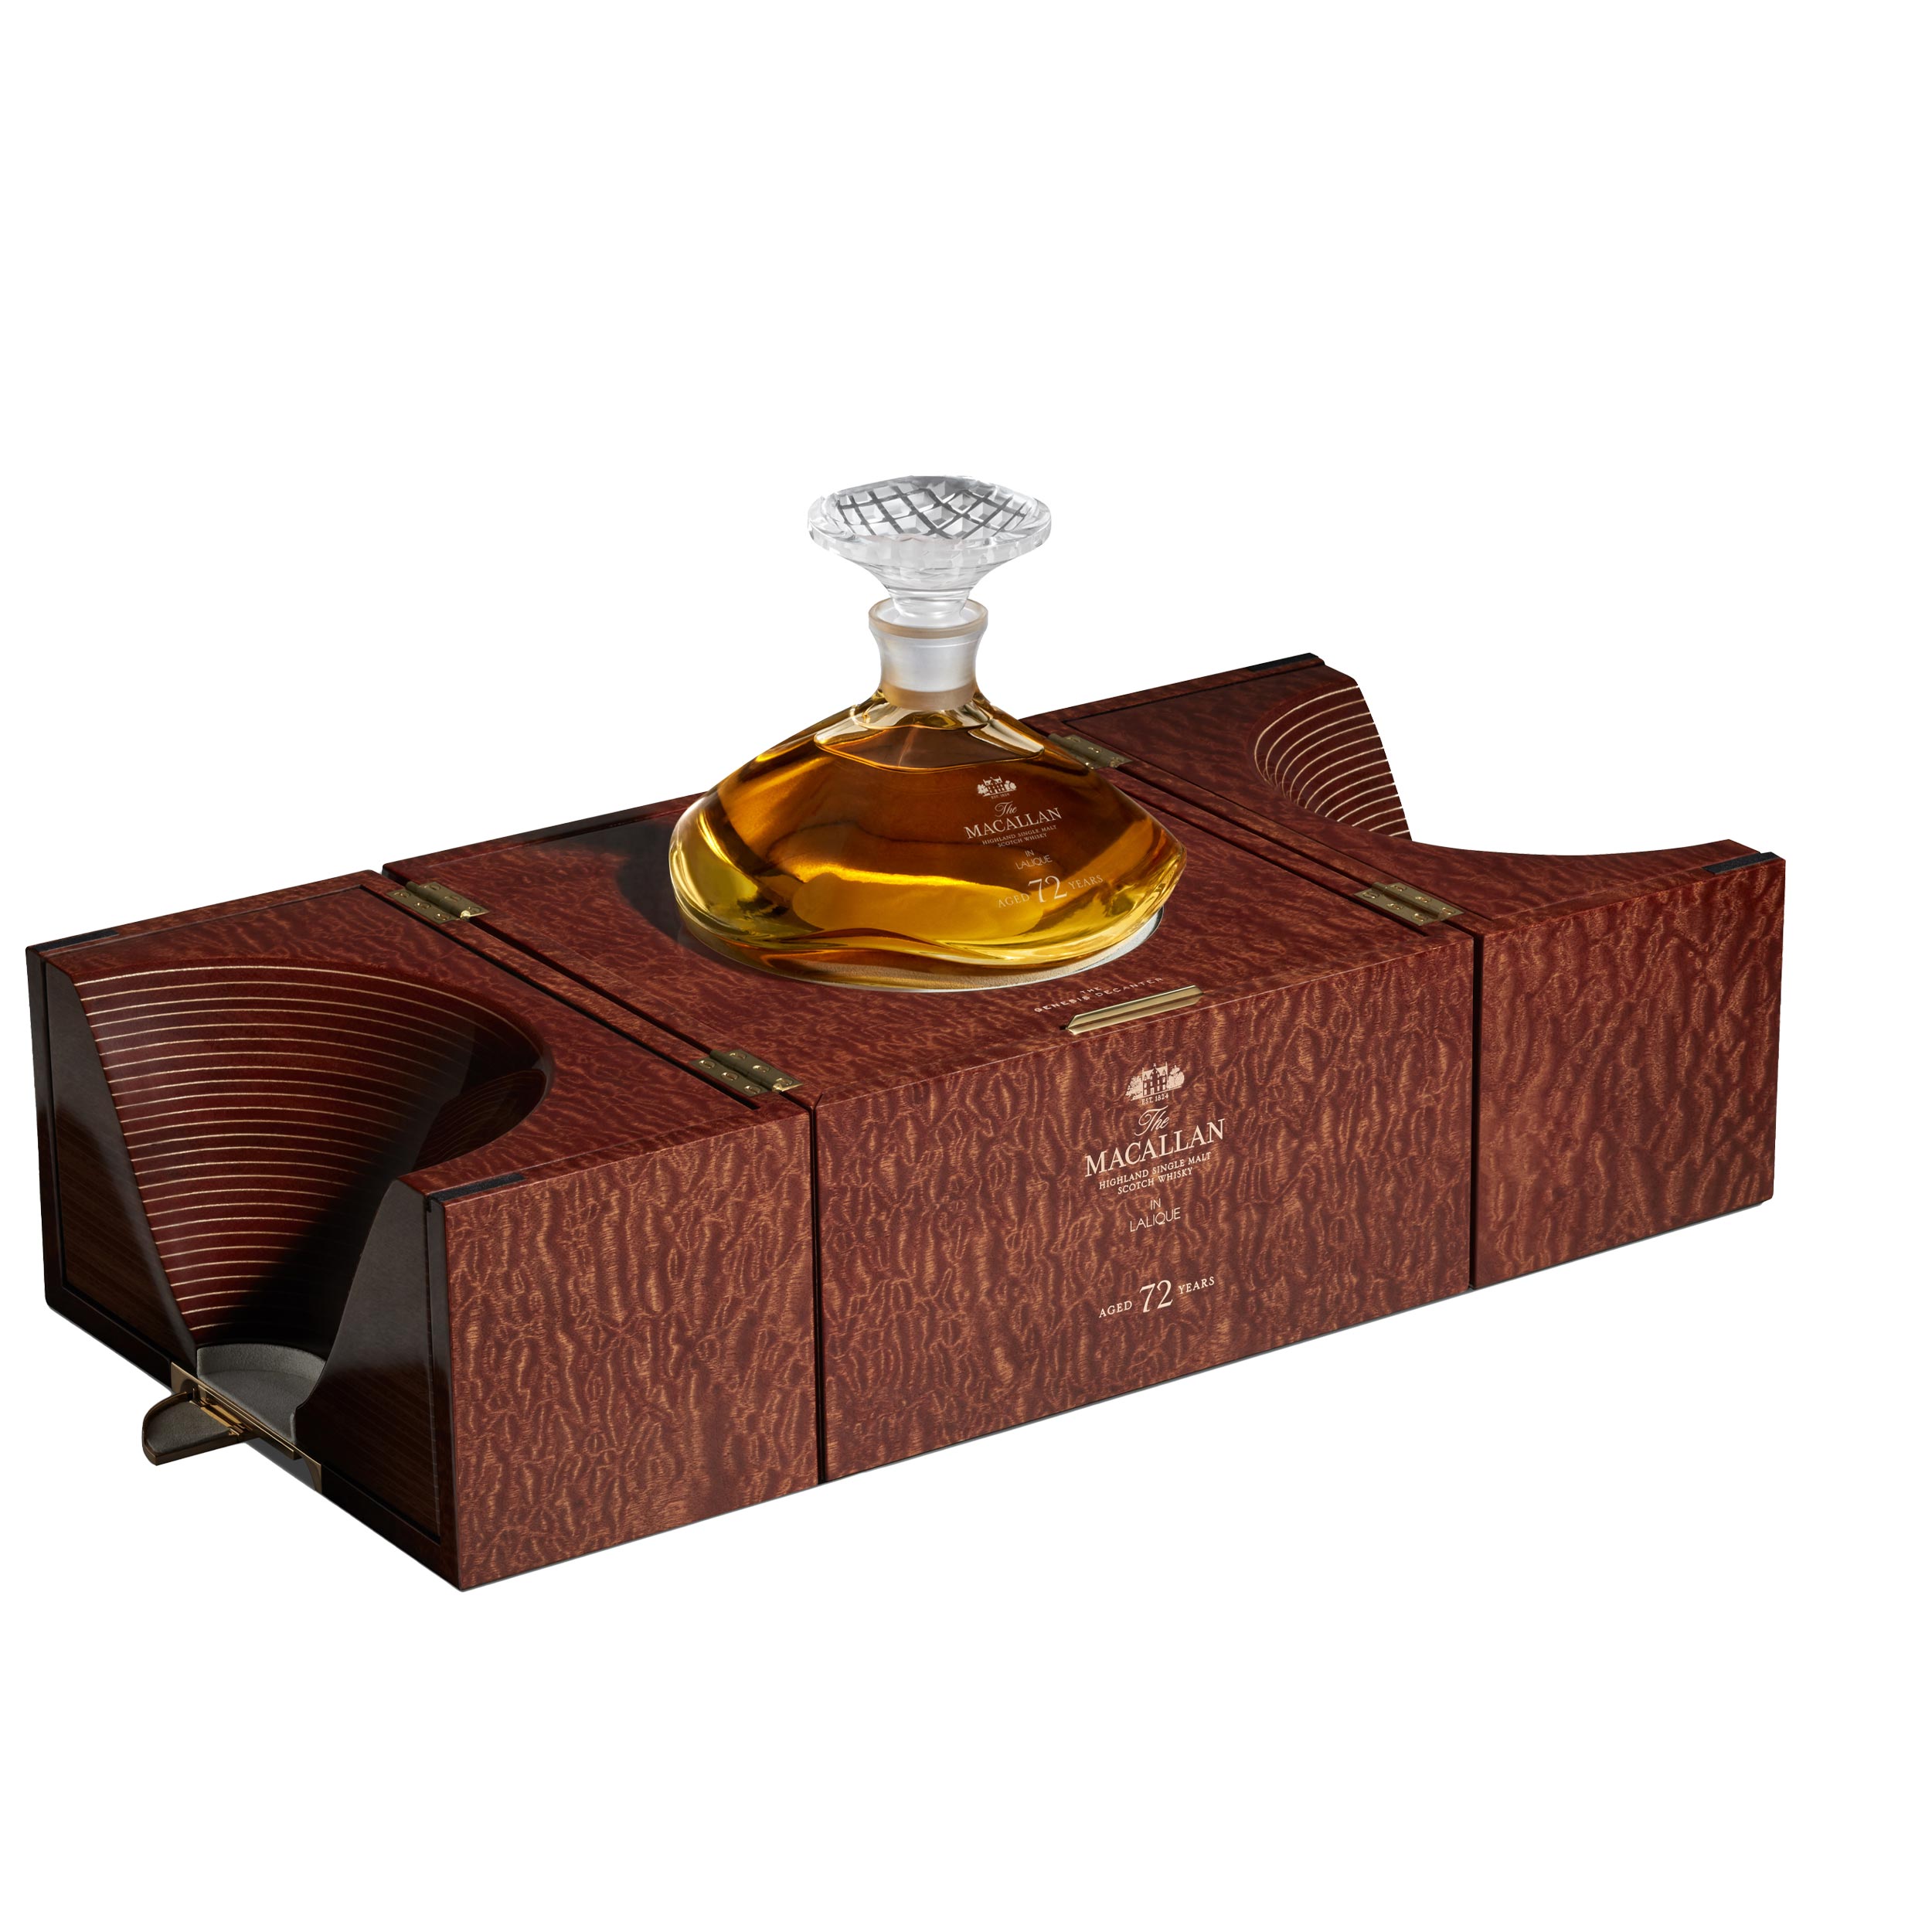 Macallan 72 Year Old in Lalique.